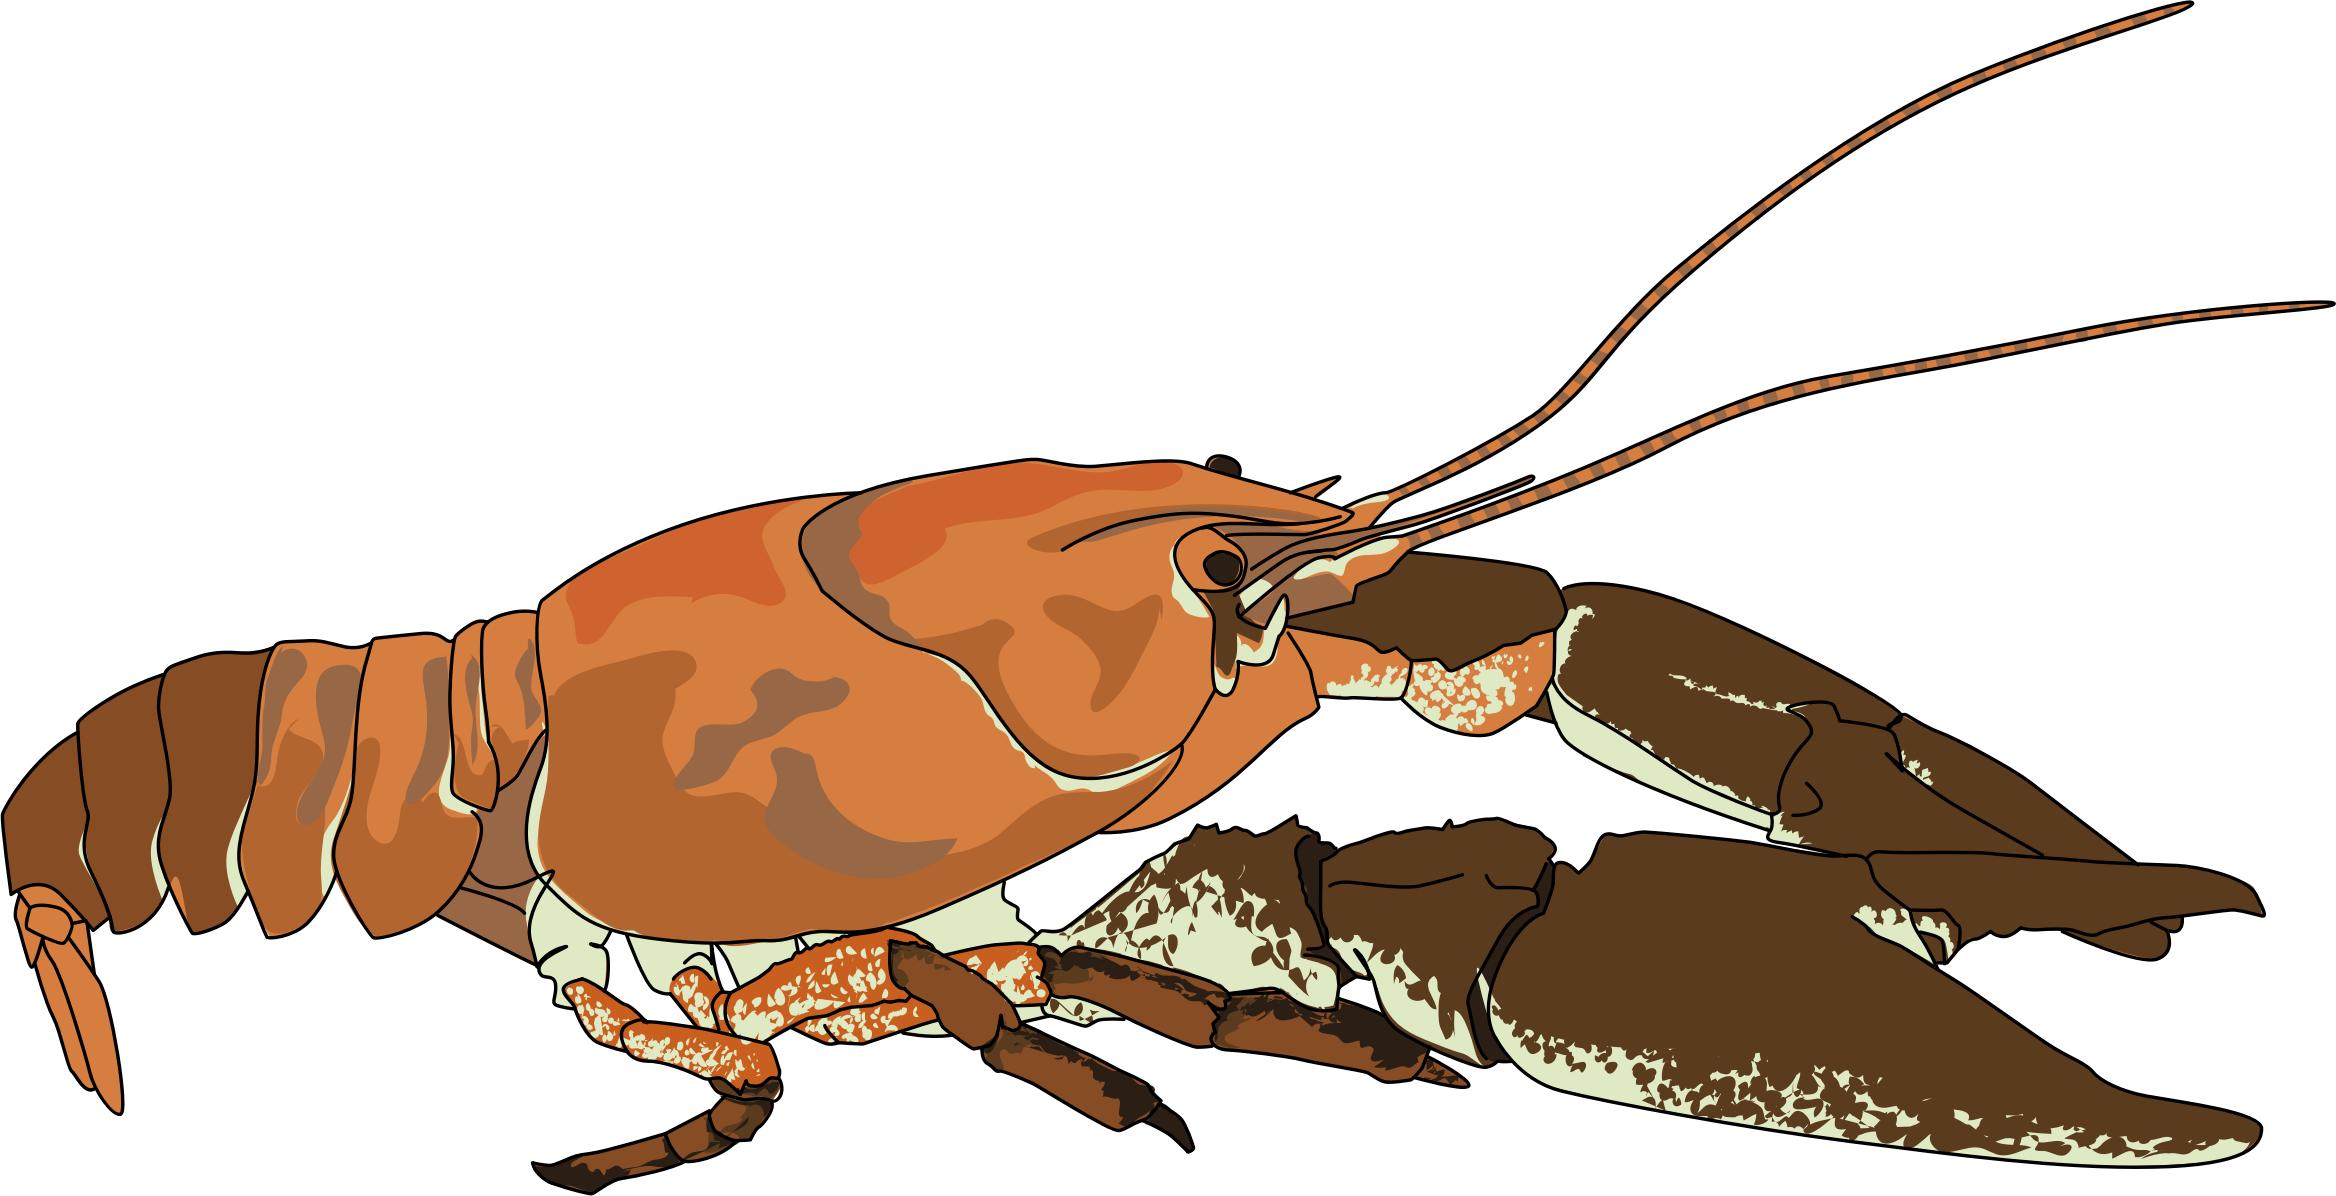 Ecrevisse a pattes blanches - white-clawed crayfish png